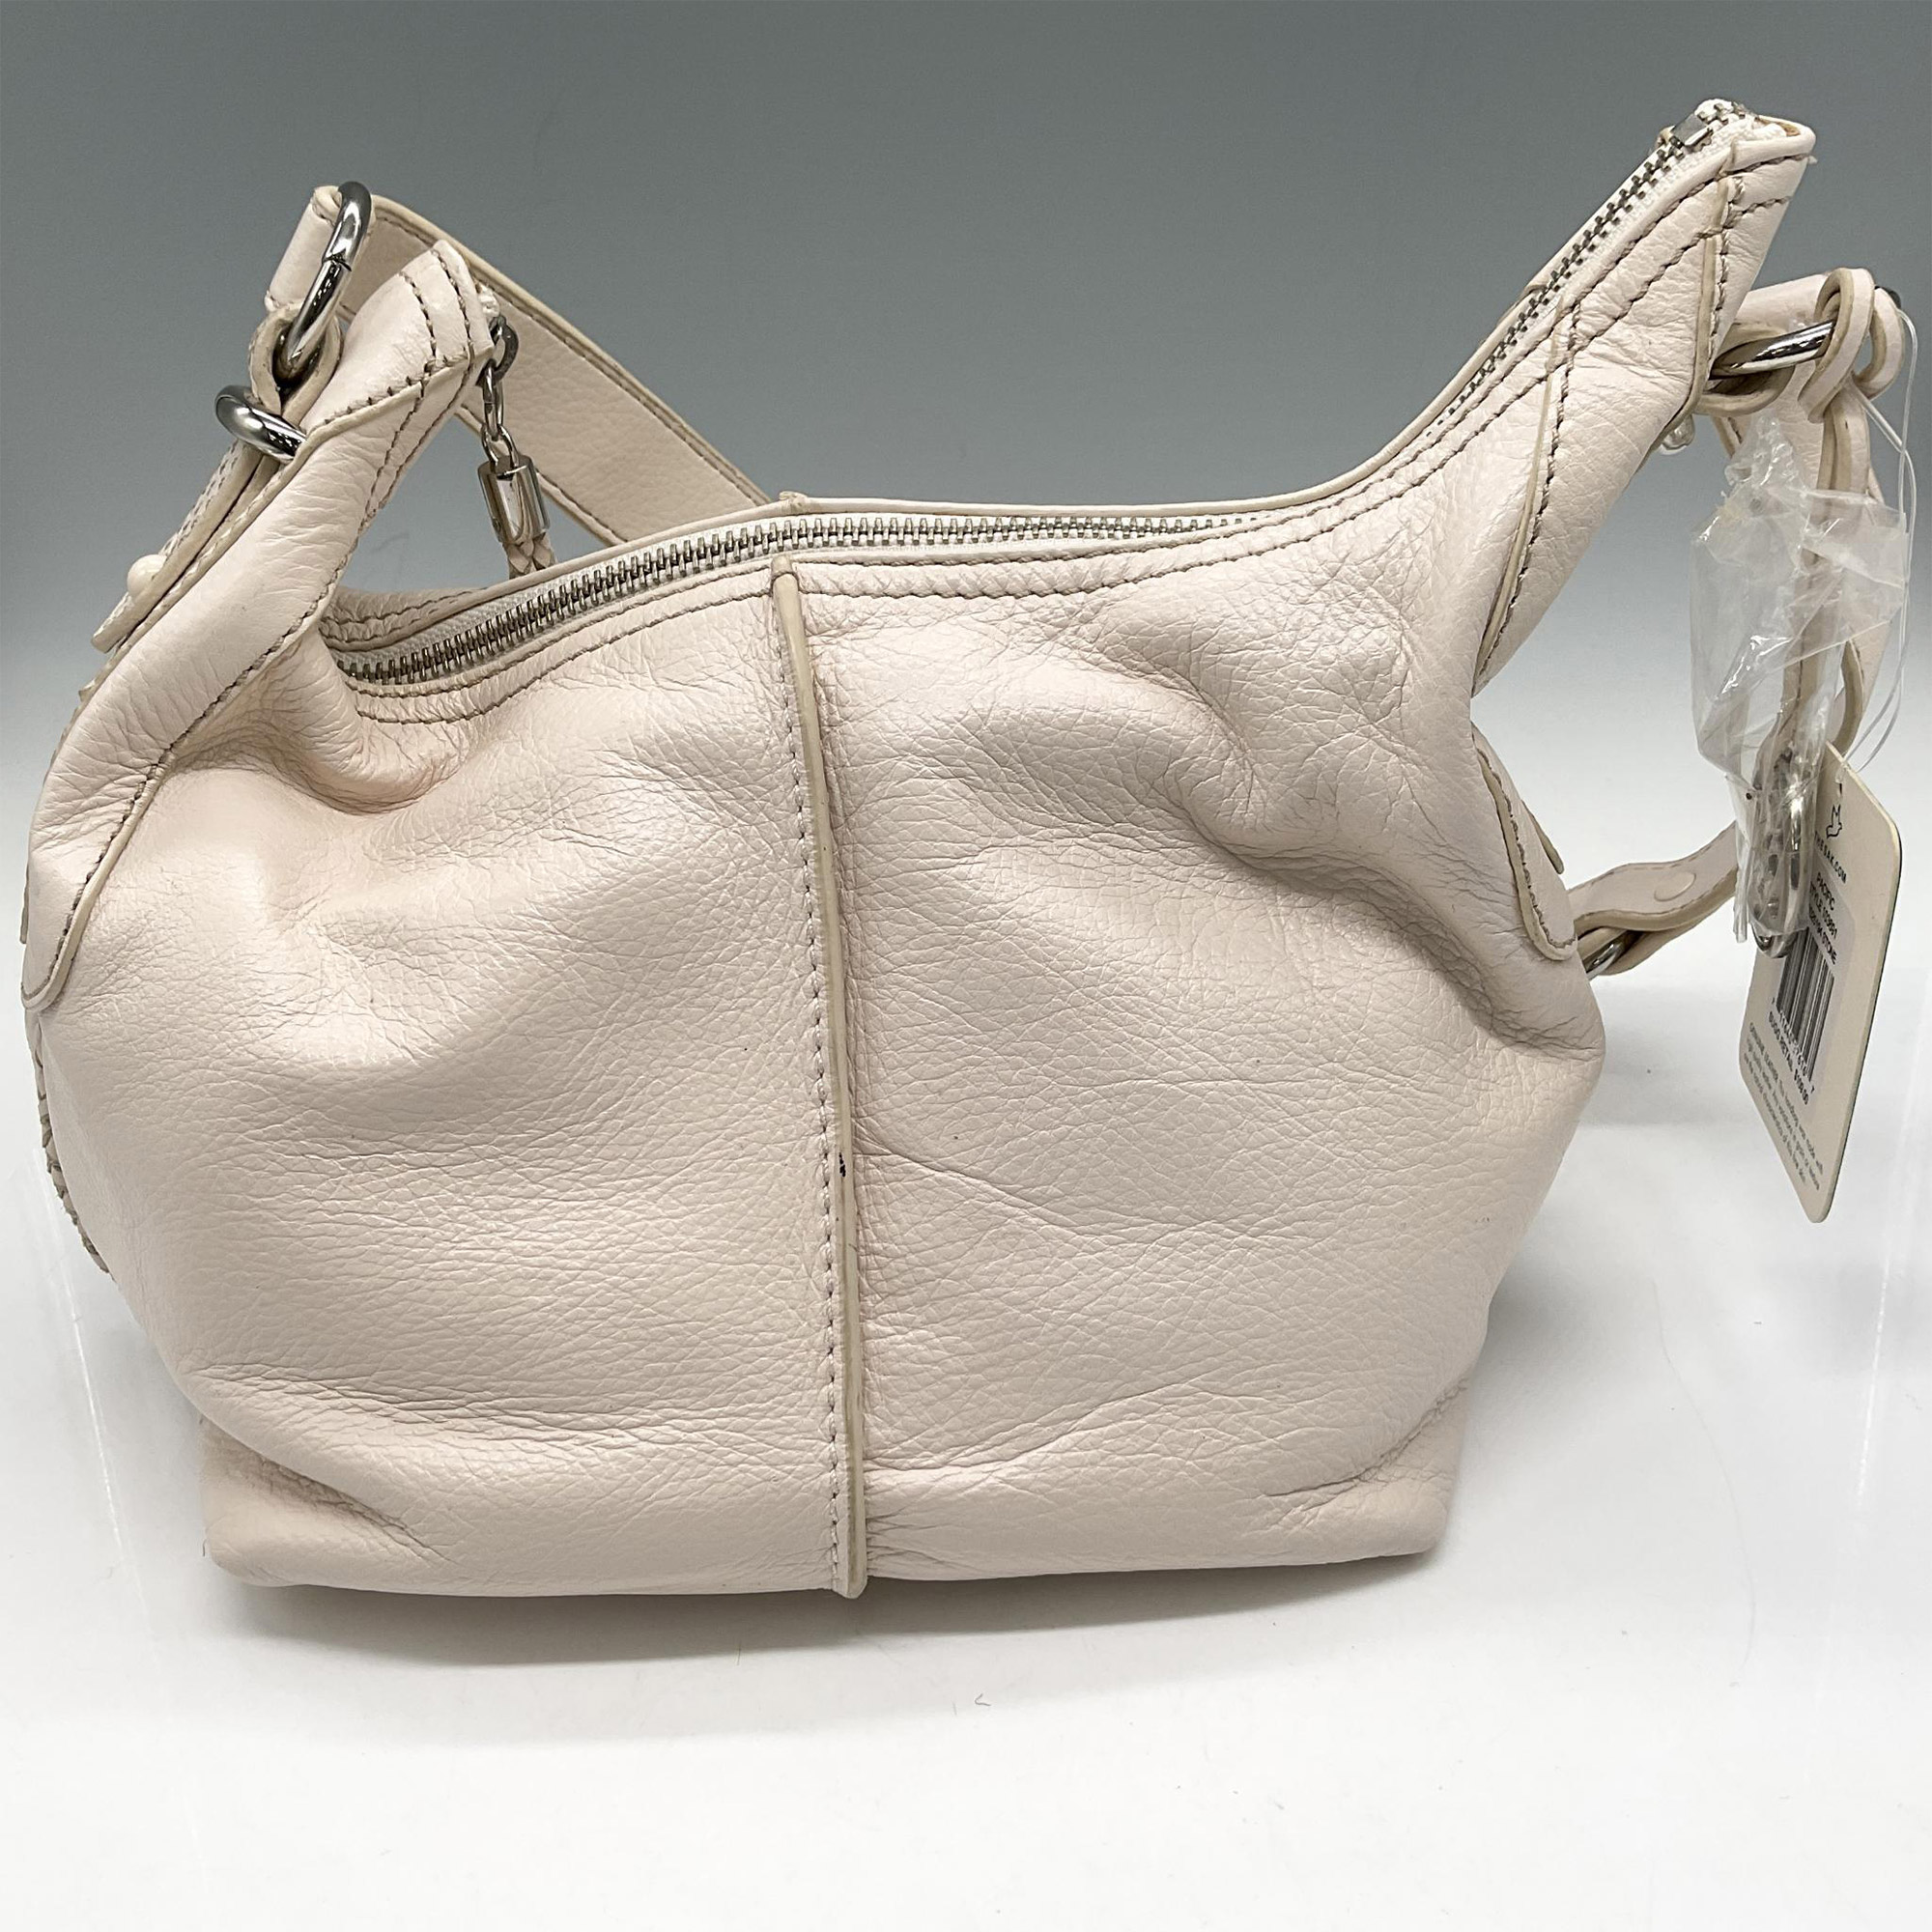 The Sak Purse, Pacific Style Leather Hobo in Stone - Image 2 of 3